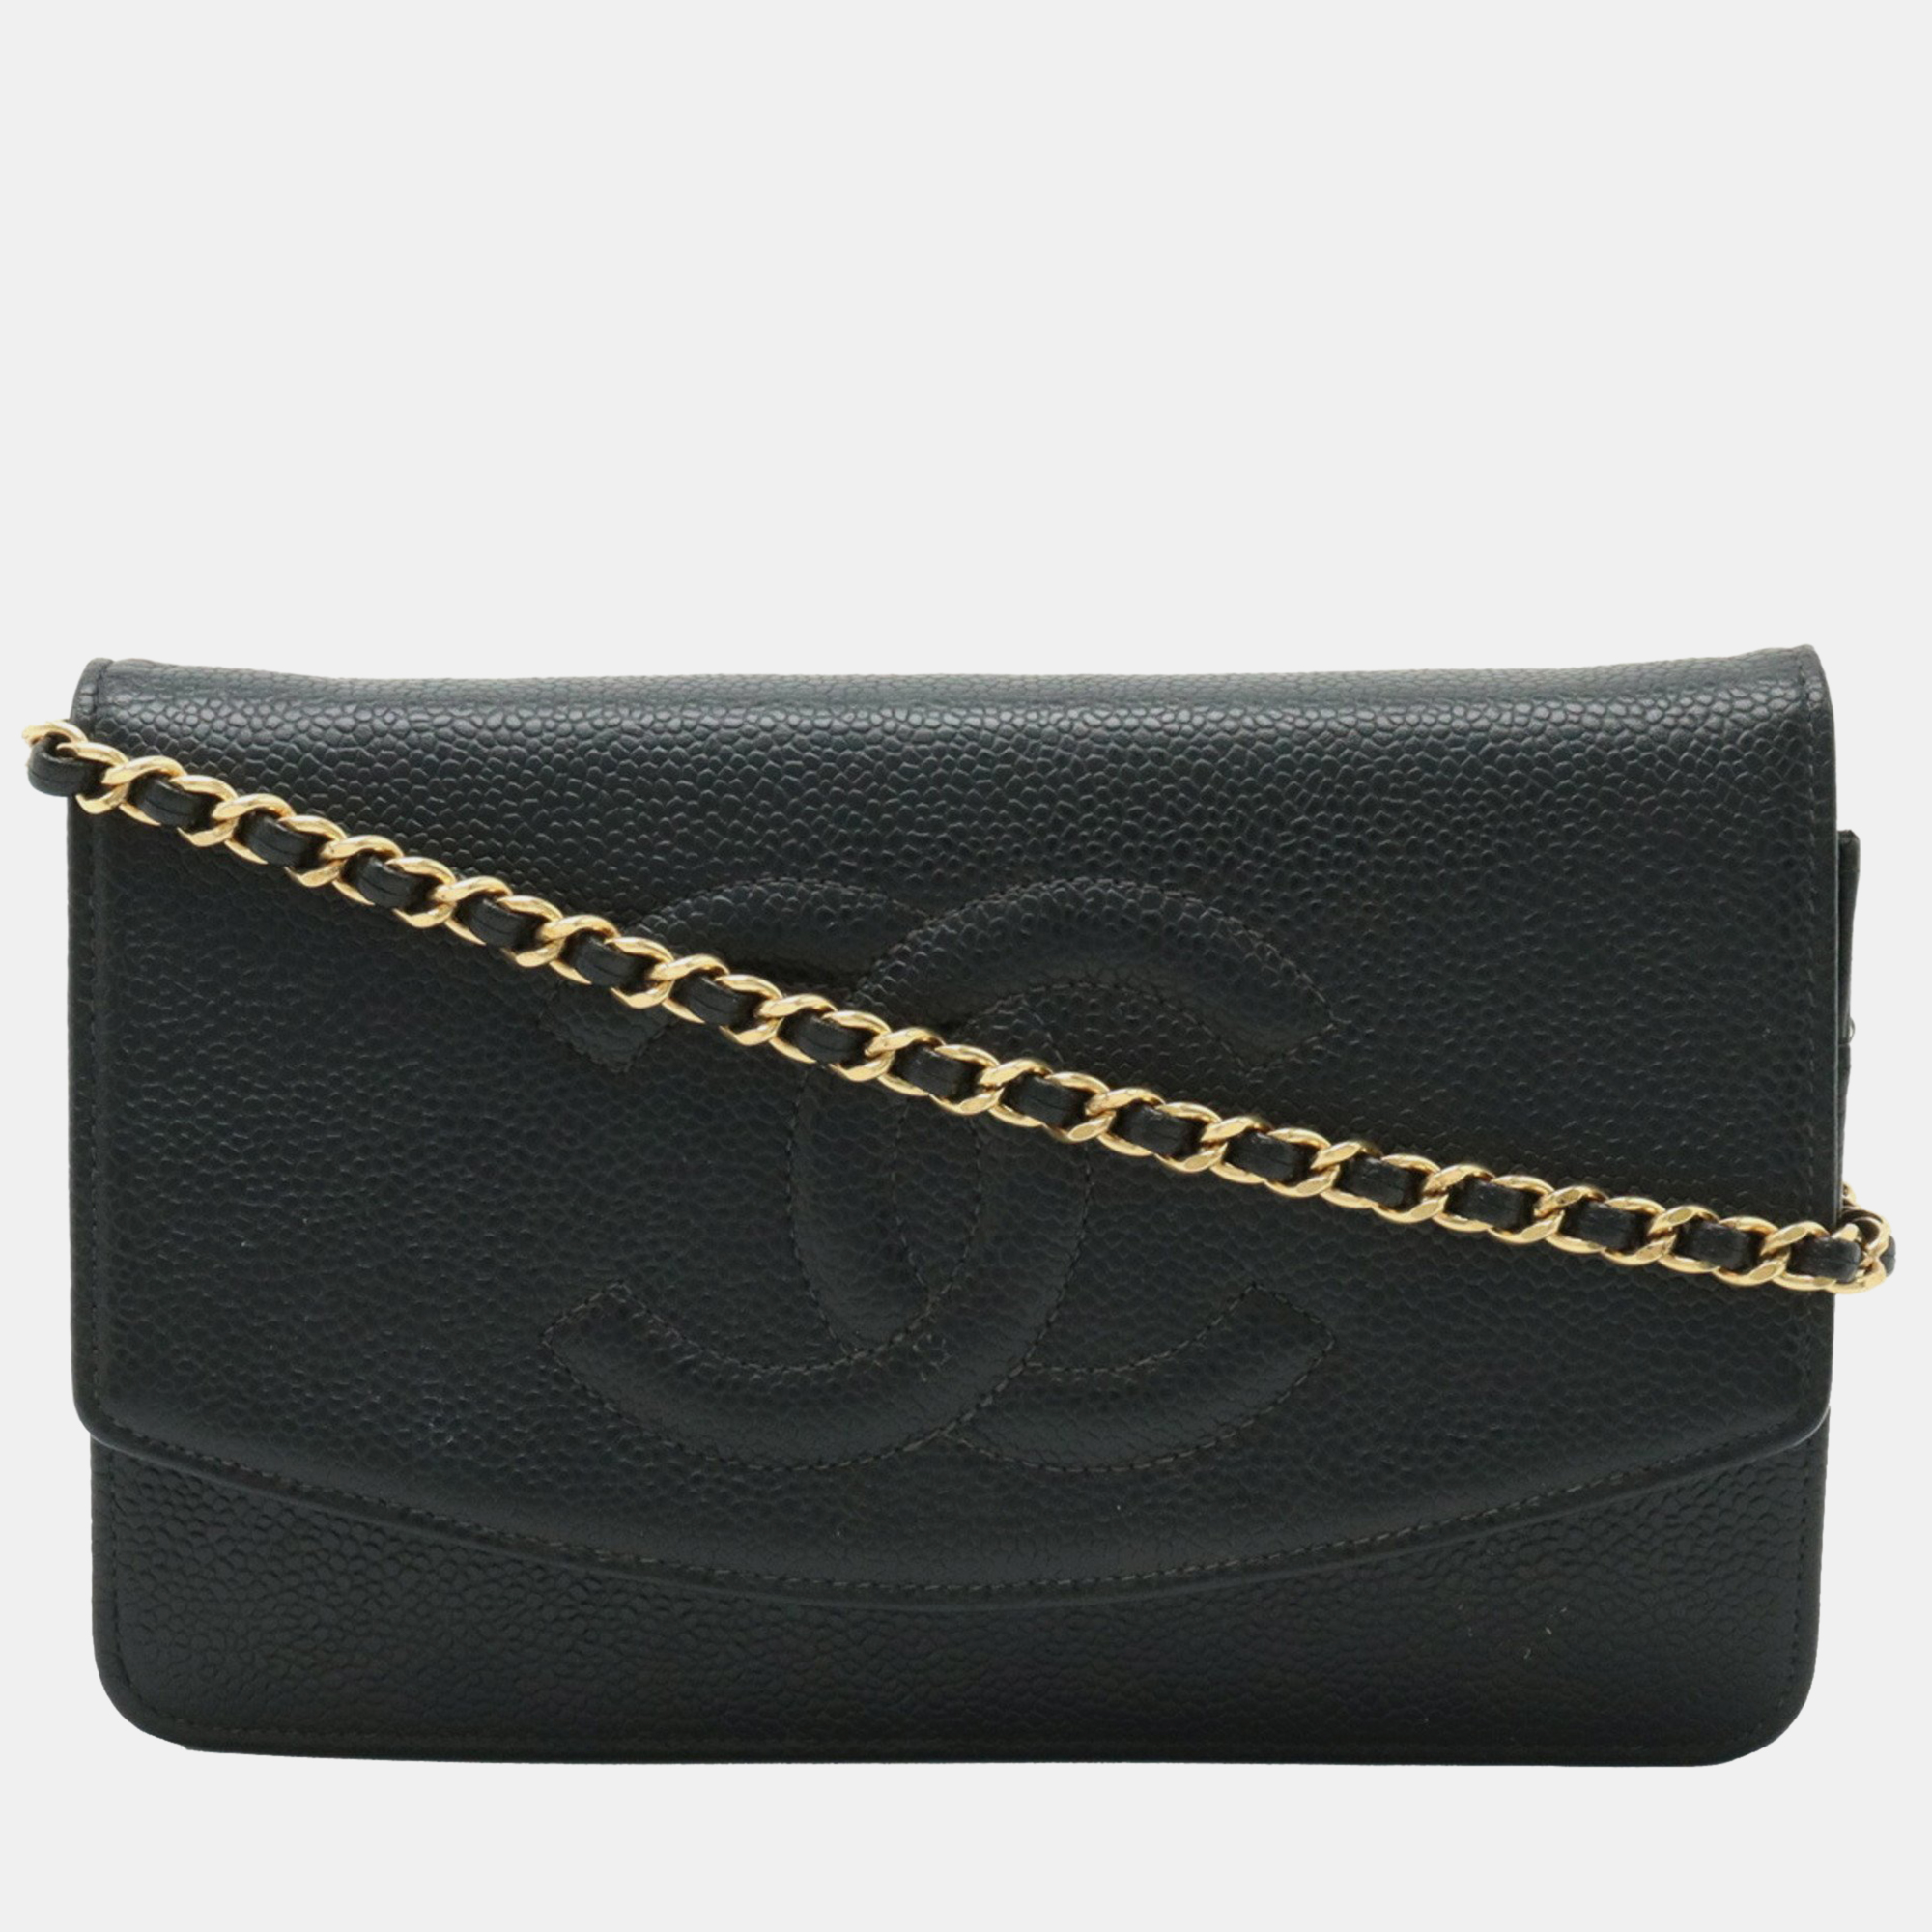 Pre-owned Chanel Black Leather Caviar Skin Coco Mark Chain Wallet